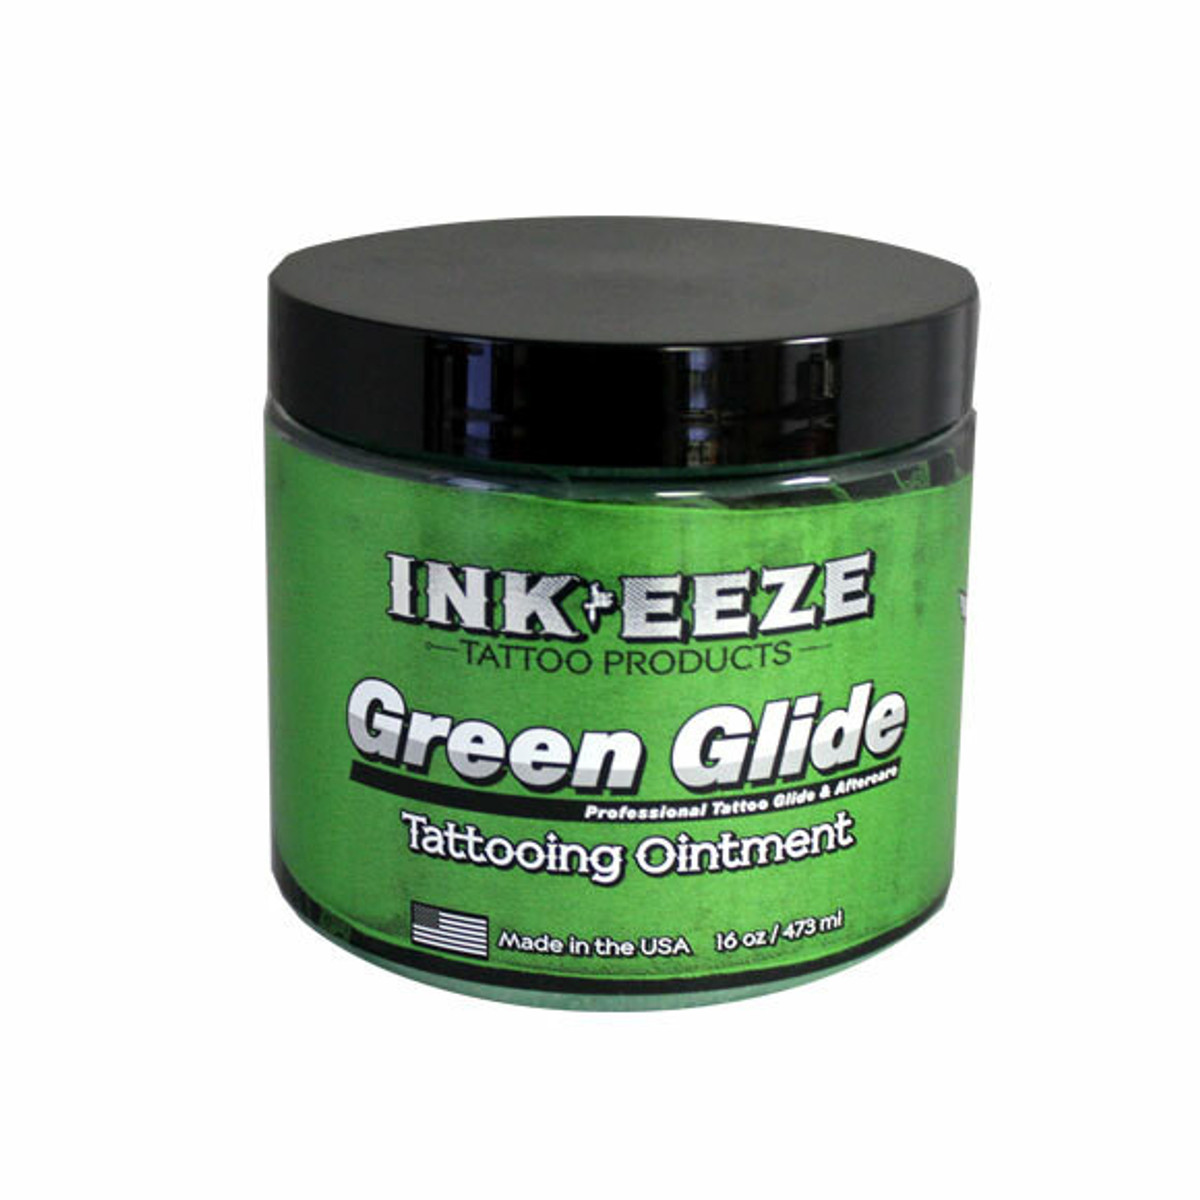 INK-EEZE Tattoo Ointment